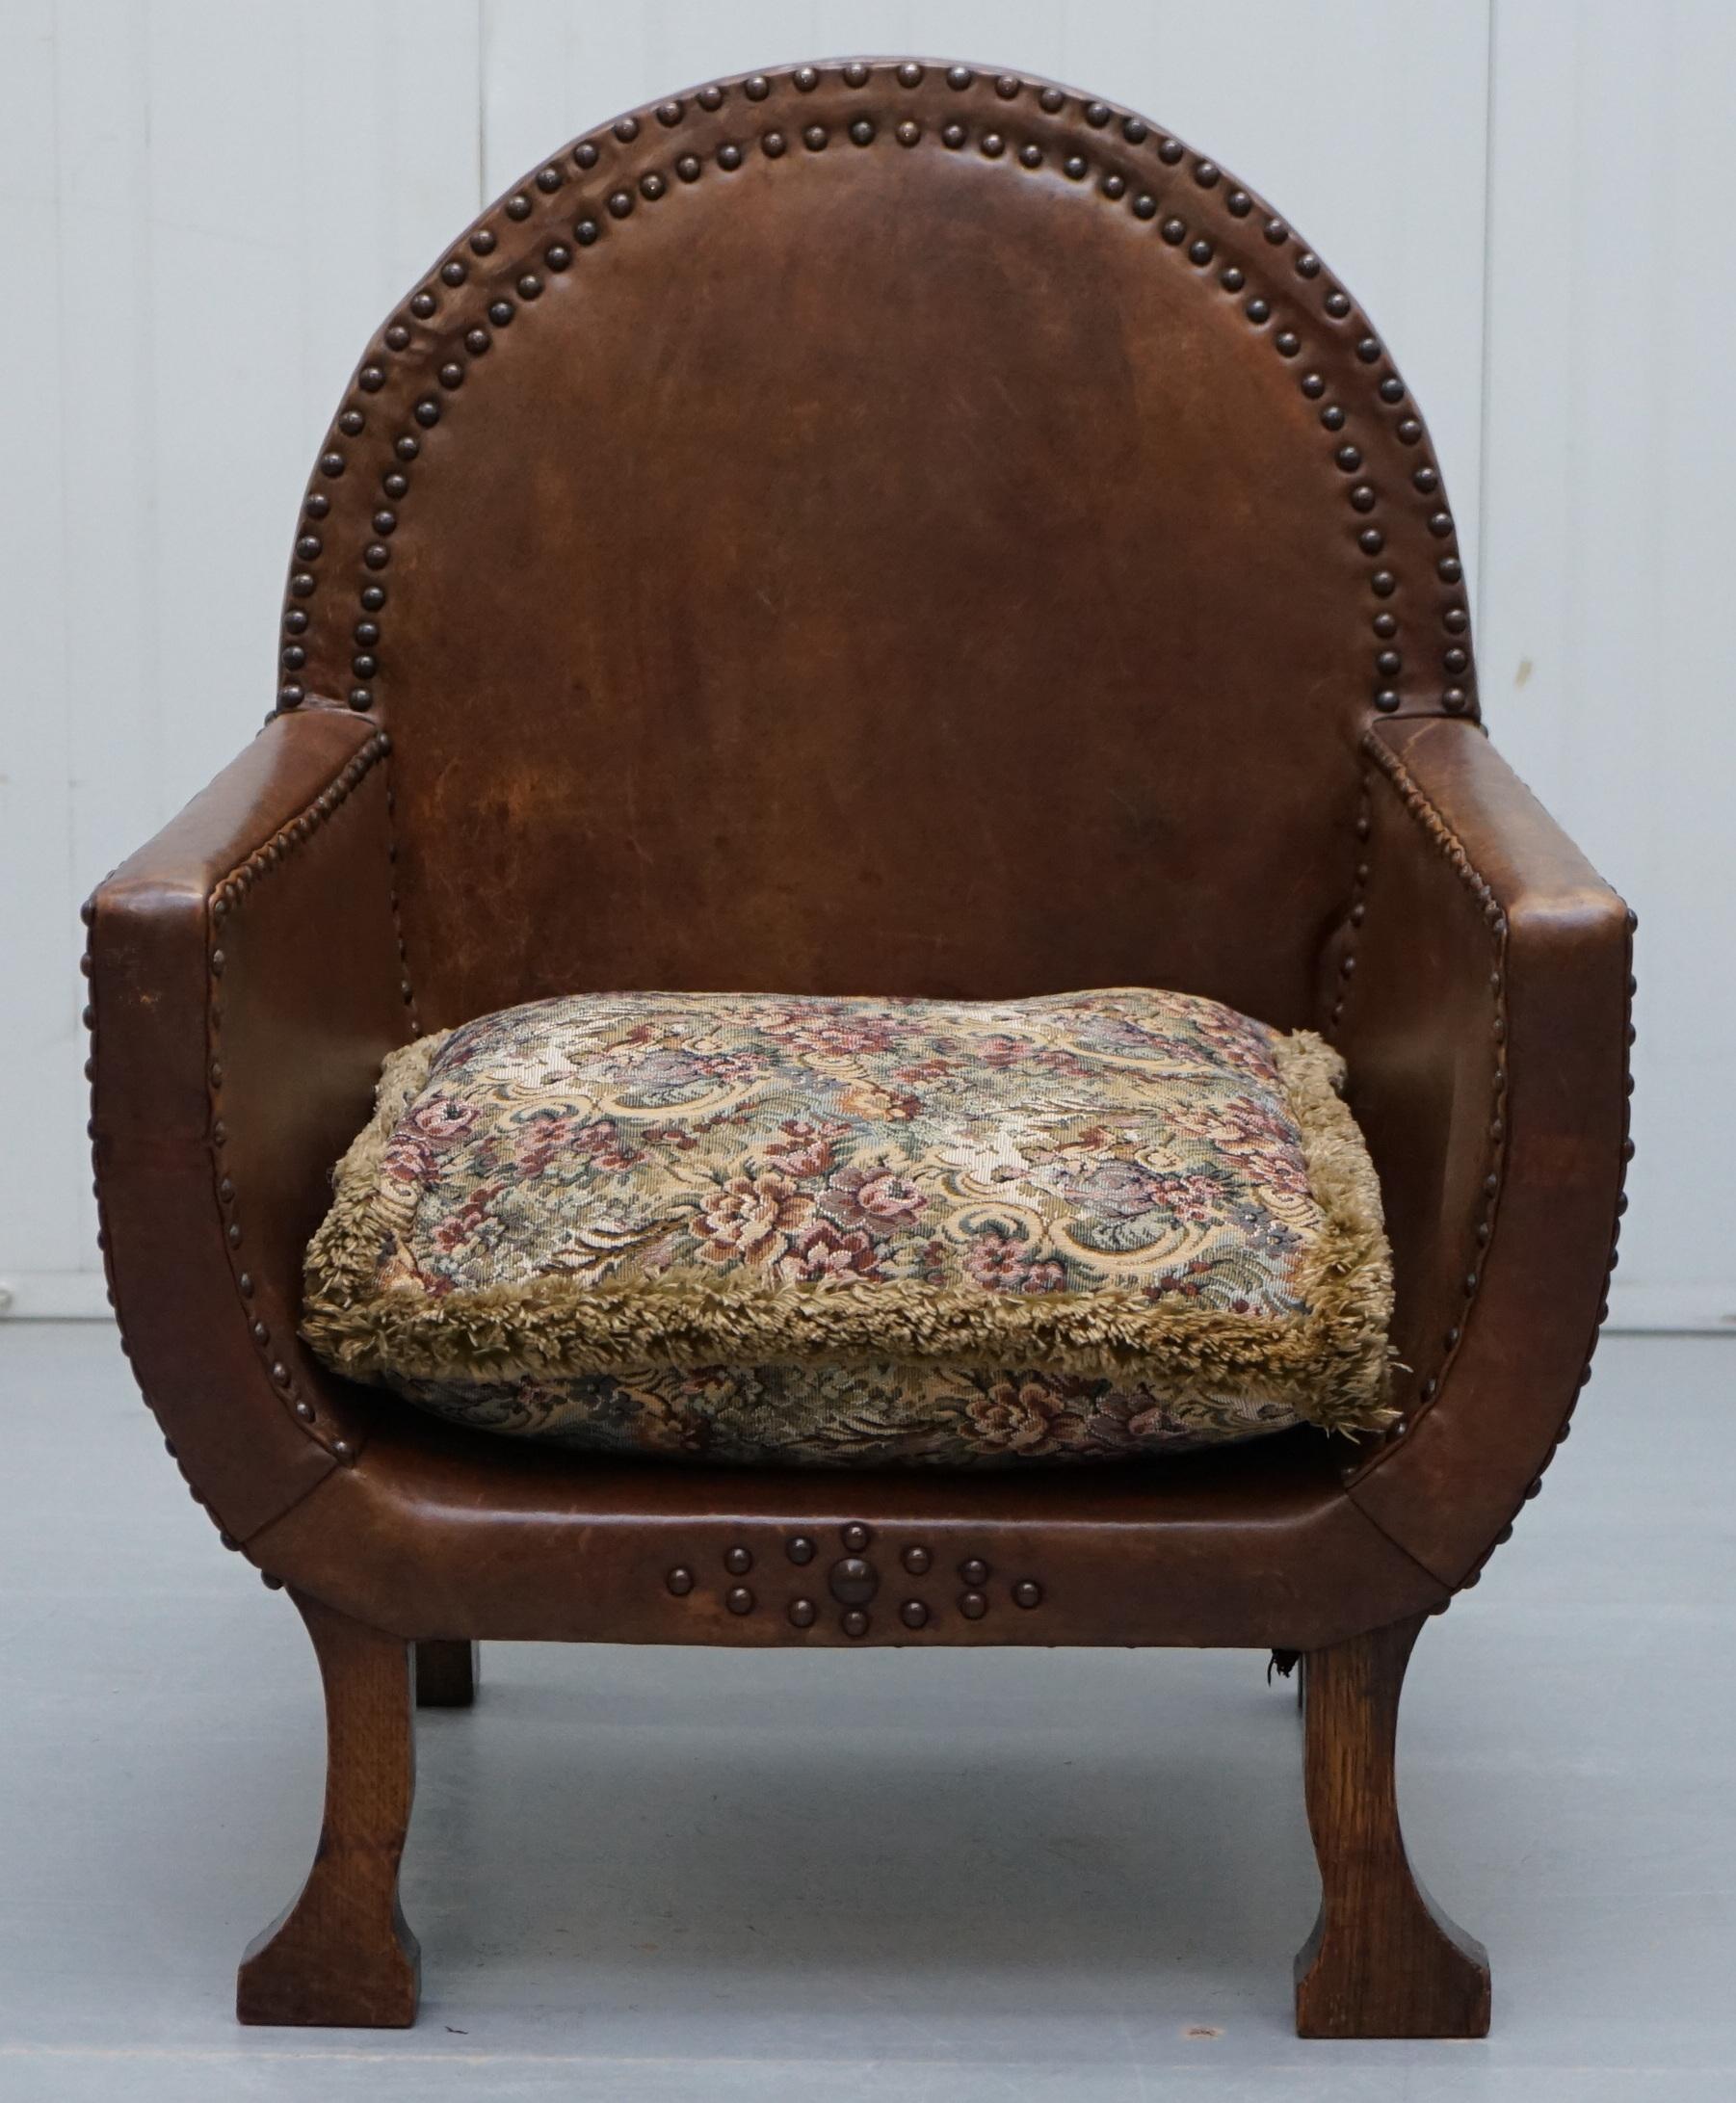 We are delighted to offer for sale this stunning small original Edwardian Children’s brown leather armchair

A good looking and well made piece, we have cleaned waxed and polished it from top to bottom

As you can see by the size I would say